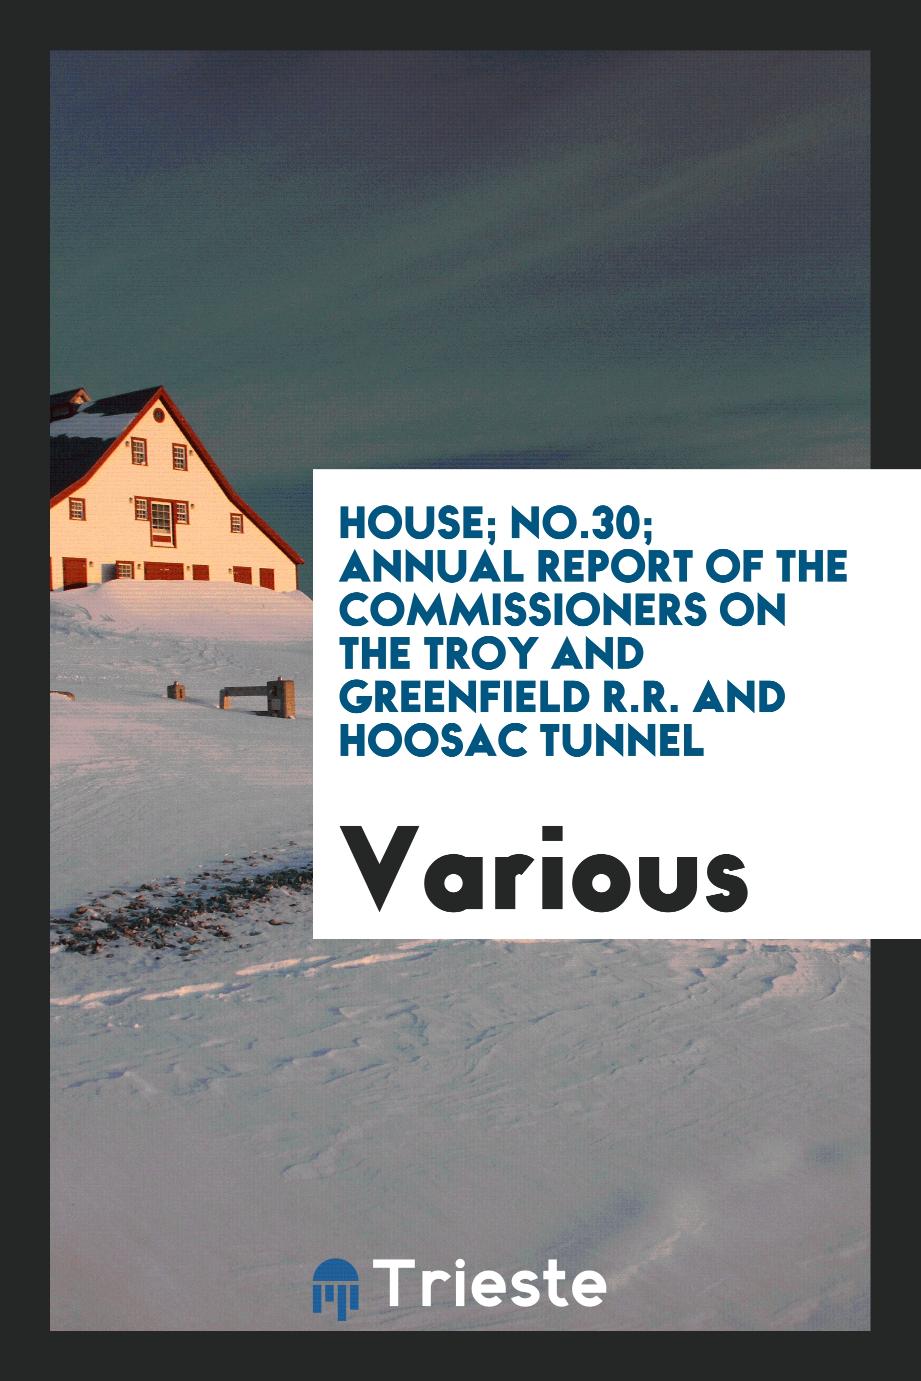 House; No.30; Annual Report of the Commissioners on the Troy and Greenfield R.R. and Hoosac Tunnel